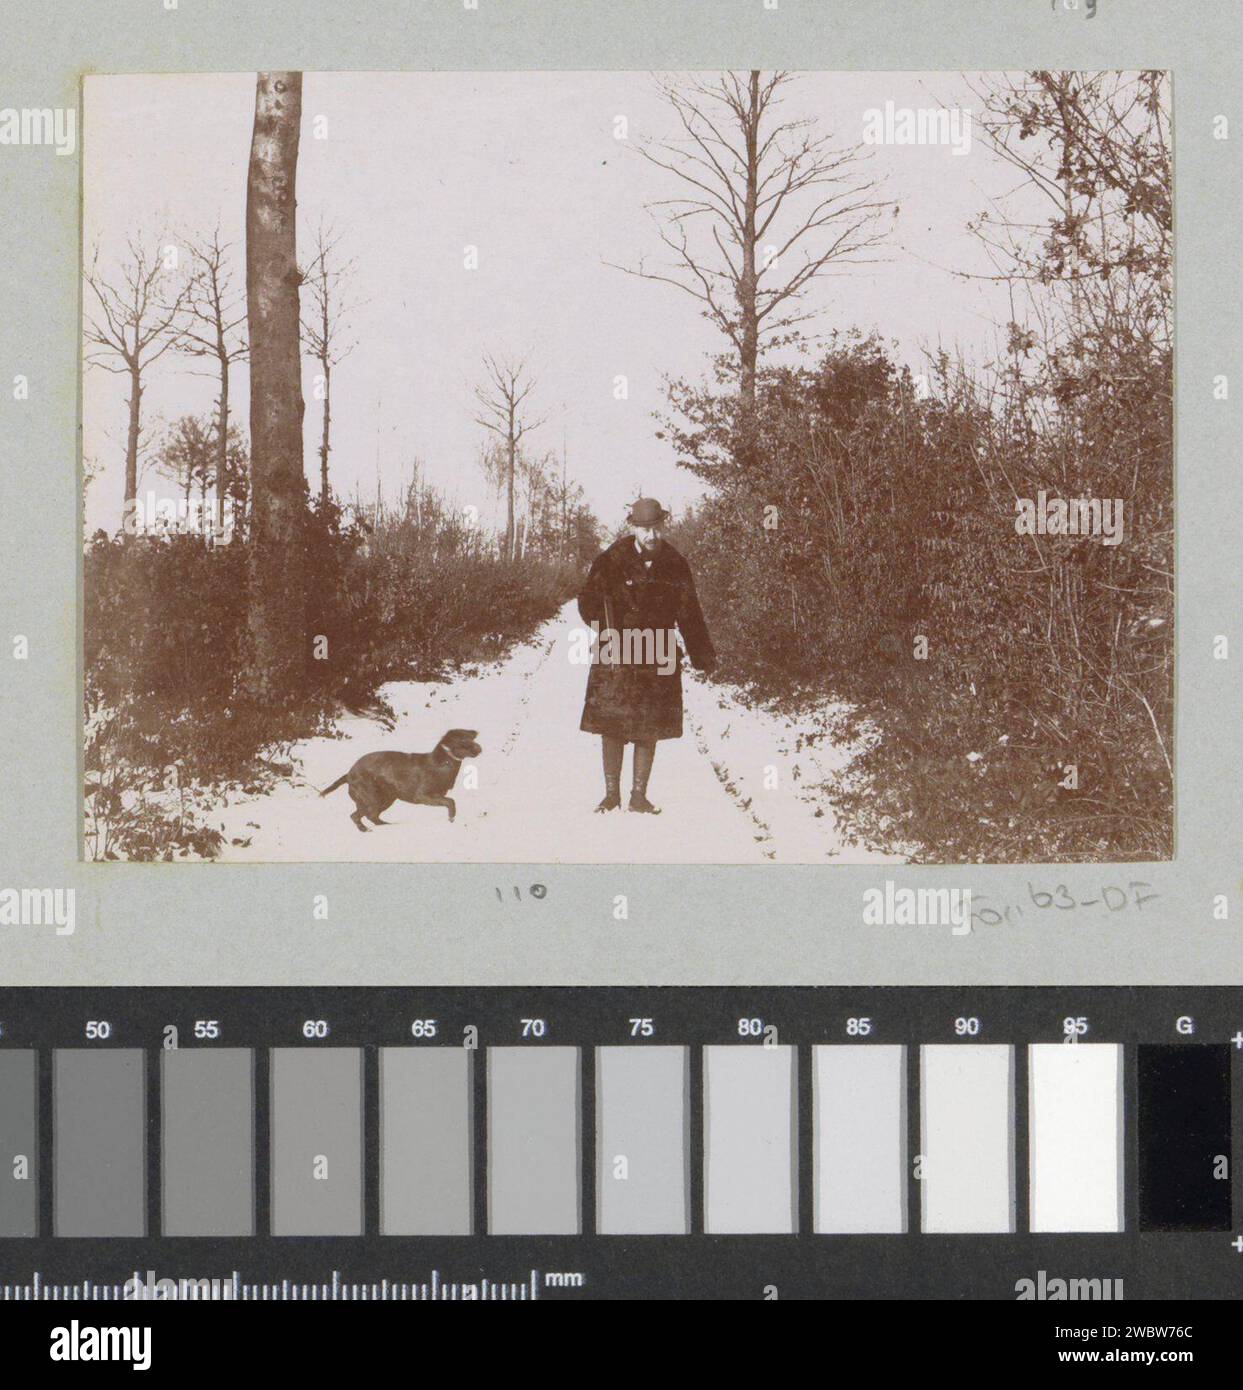 Hunter with dog on snowy path, presumably at Arcachon, 1897 photograph Part of photo album of a French amateur photographer with recordings of trips in France, Spain, Belgium, Luxembourg and the Netherlands, the first cars and car races. Arcachon paper. photographic support  forest path or lane. snow. hunter. hunting dogs Arcachon Stock Photo